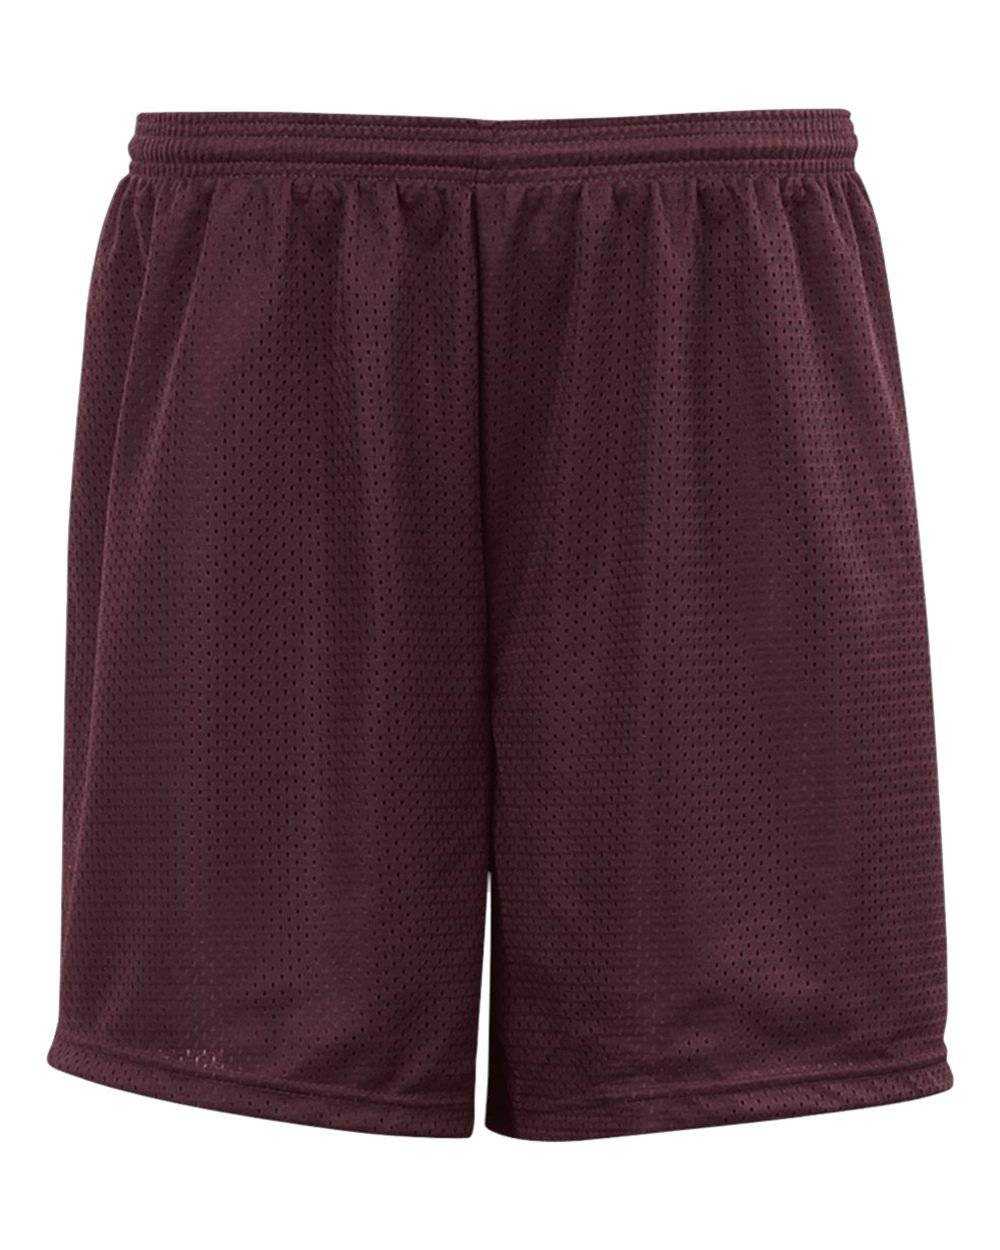 C2 Sport 5209 Youth Mesh 6" Short - Maroon - HIT a Double - 1